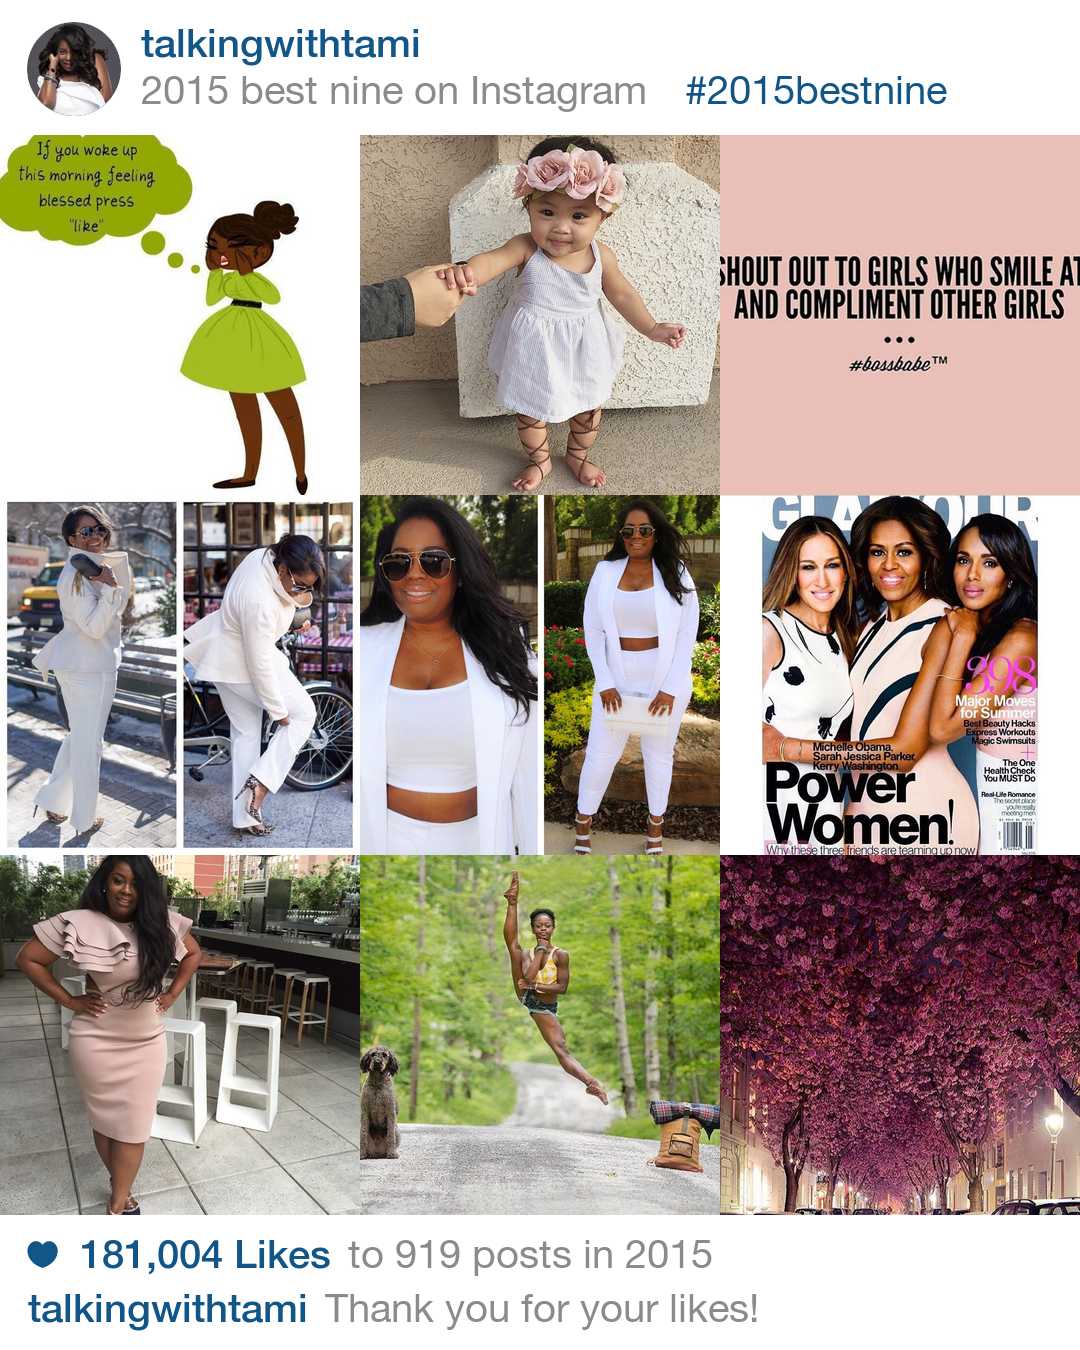 How To Make A ‘Best Nine’ On Instagram To Sum Up 2015